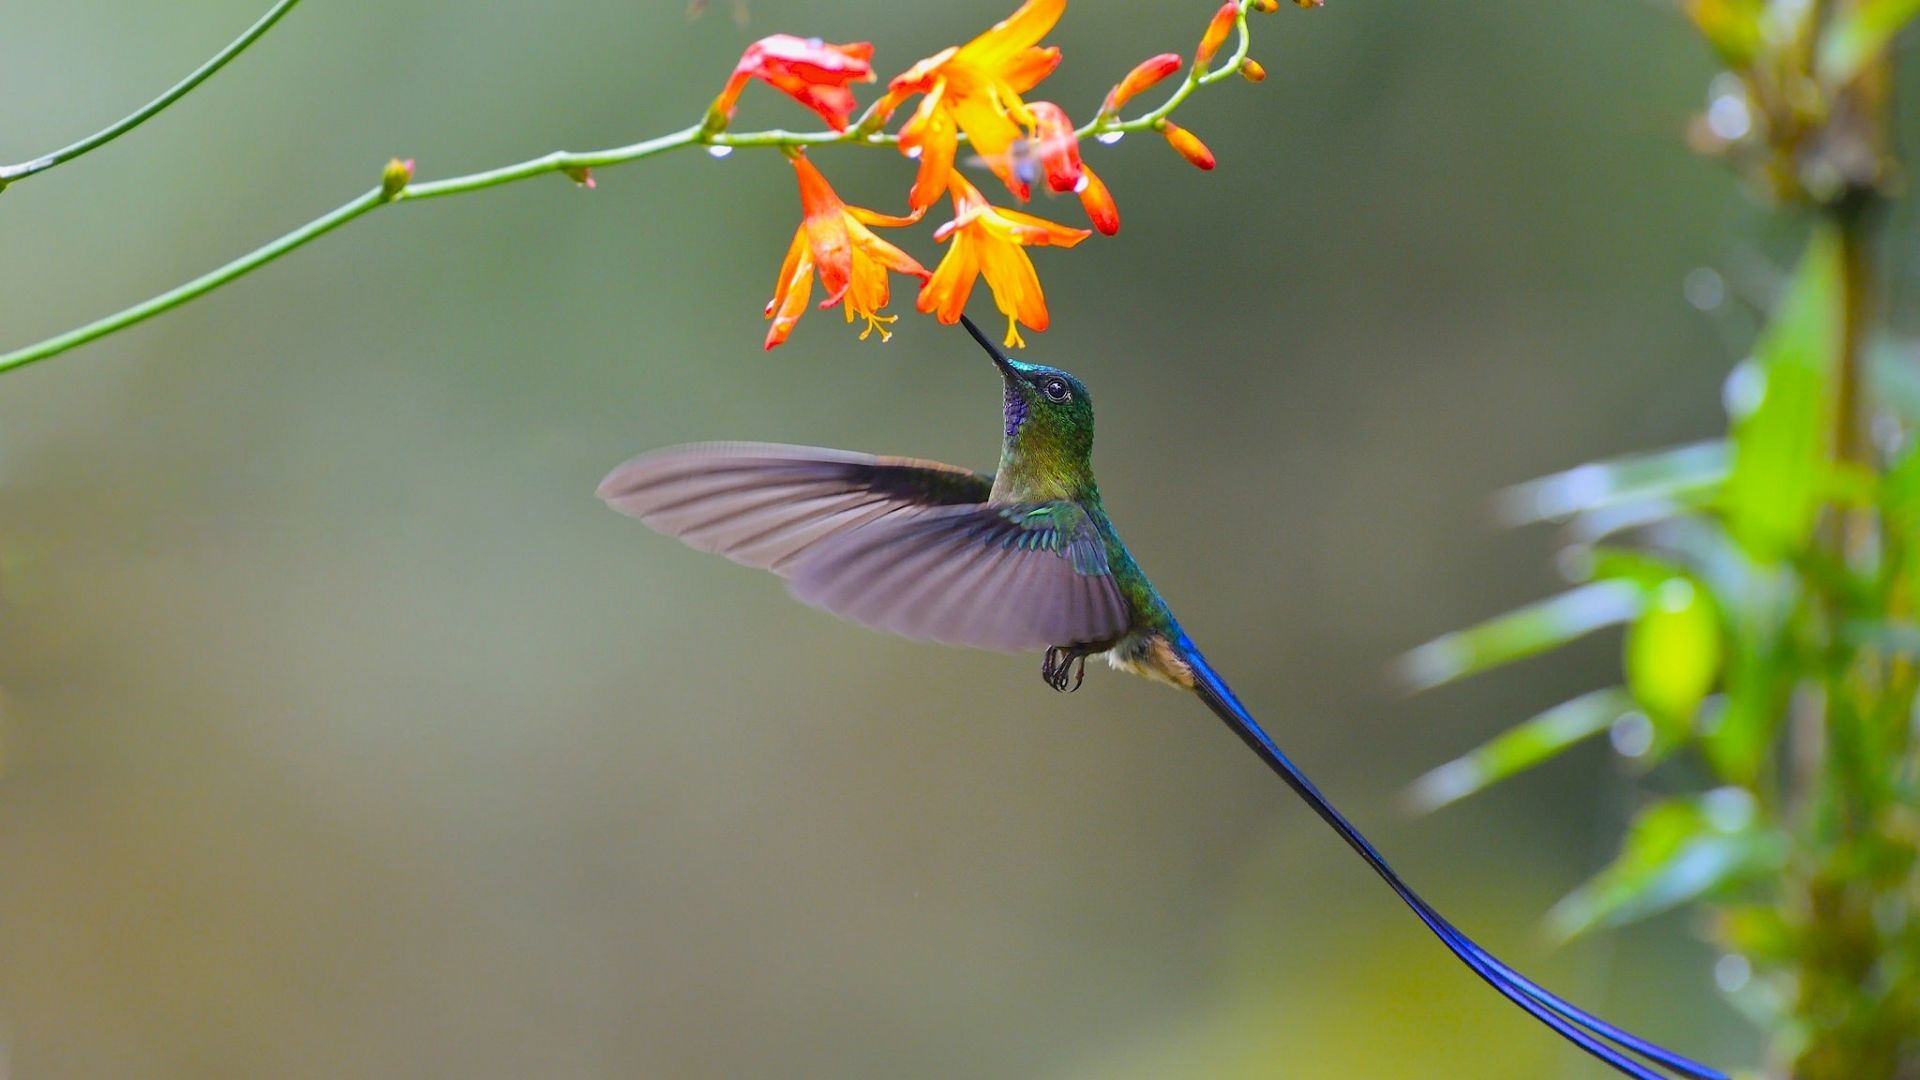 Desktop Wallpaper Cute Small Bird, Colorful, Hummingbird, Fly, Flowers, Hd  Image, Picture, Background, Qwwrbq